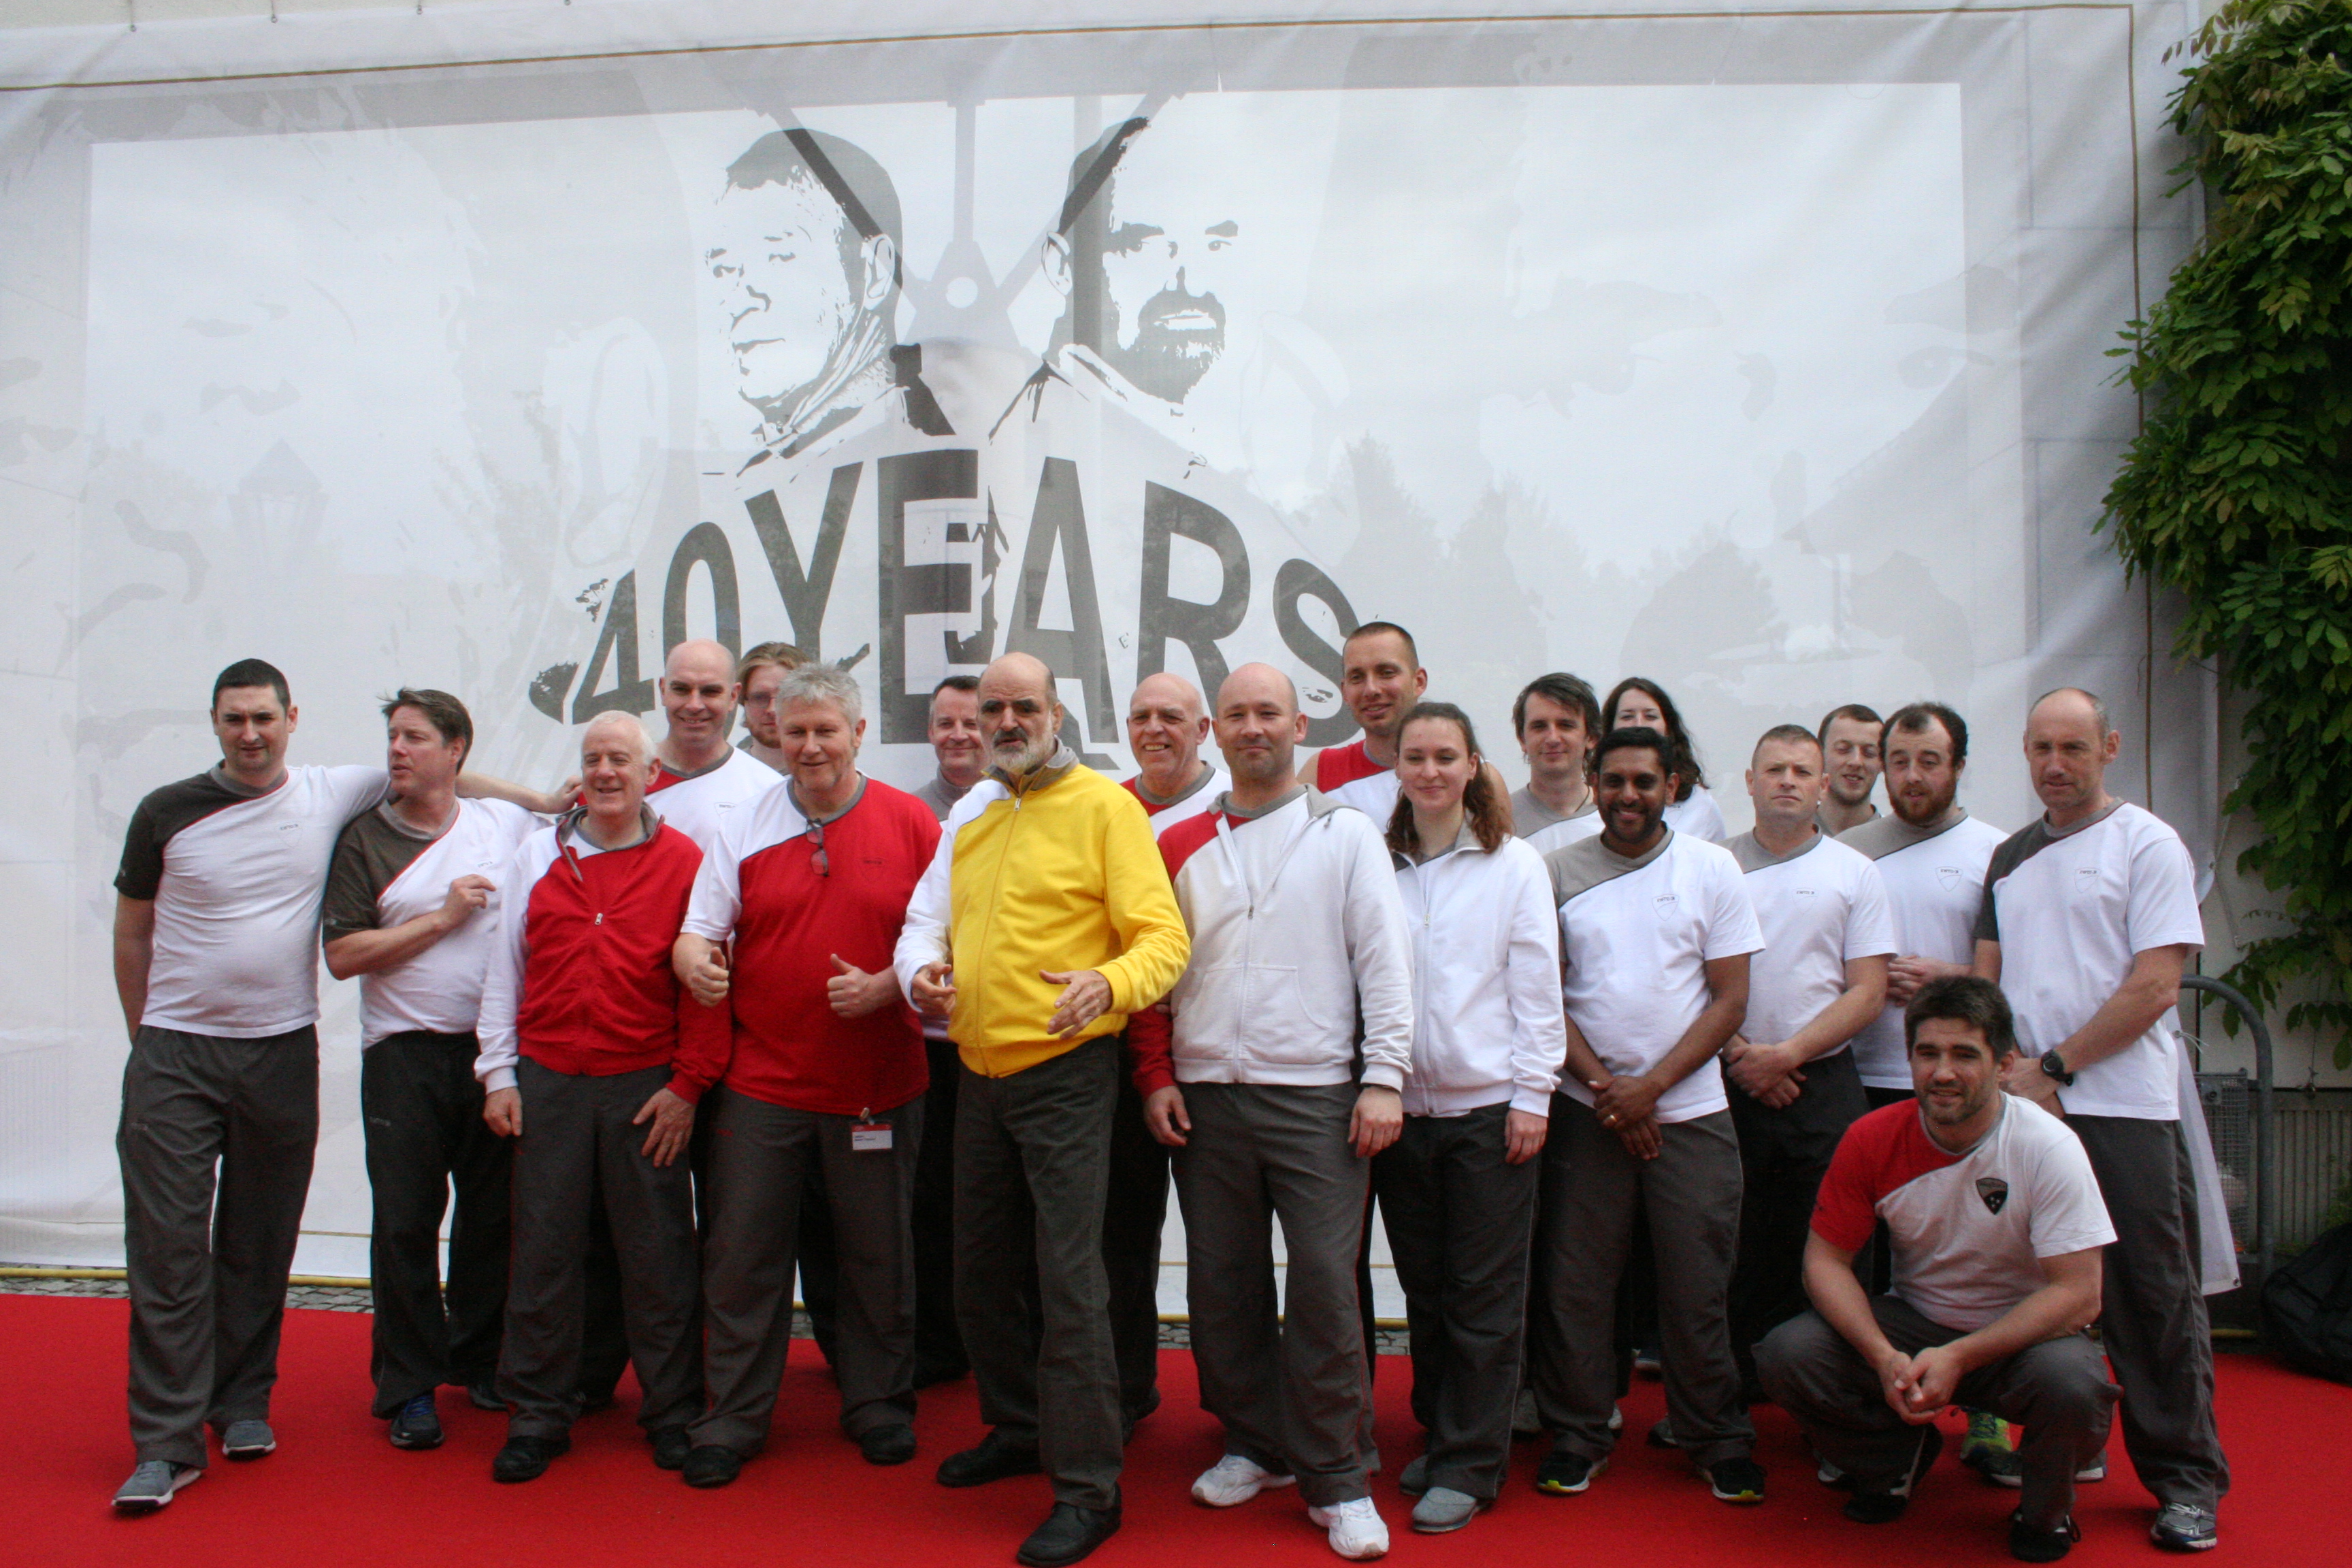 The IEWTO crew with Grandmaster Kernspecht at the 40th Anniversary weekend